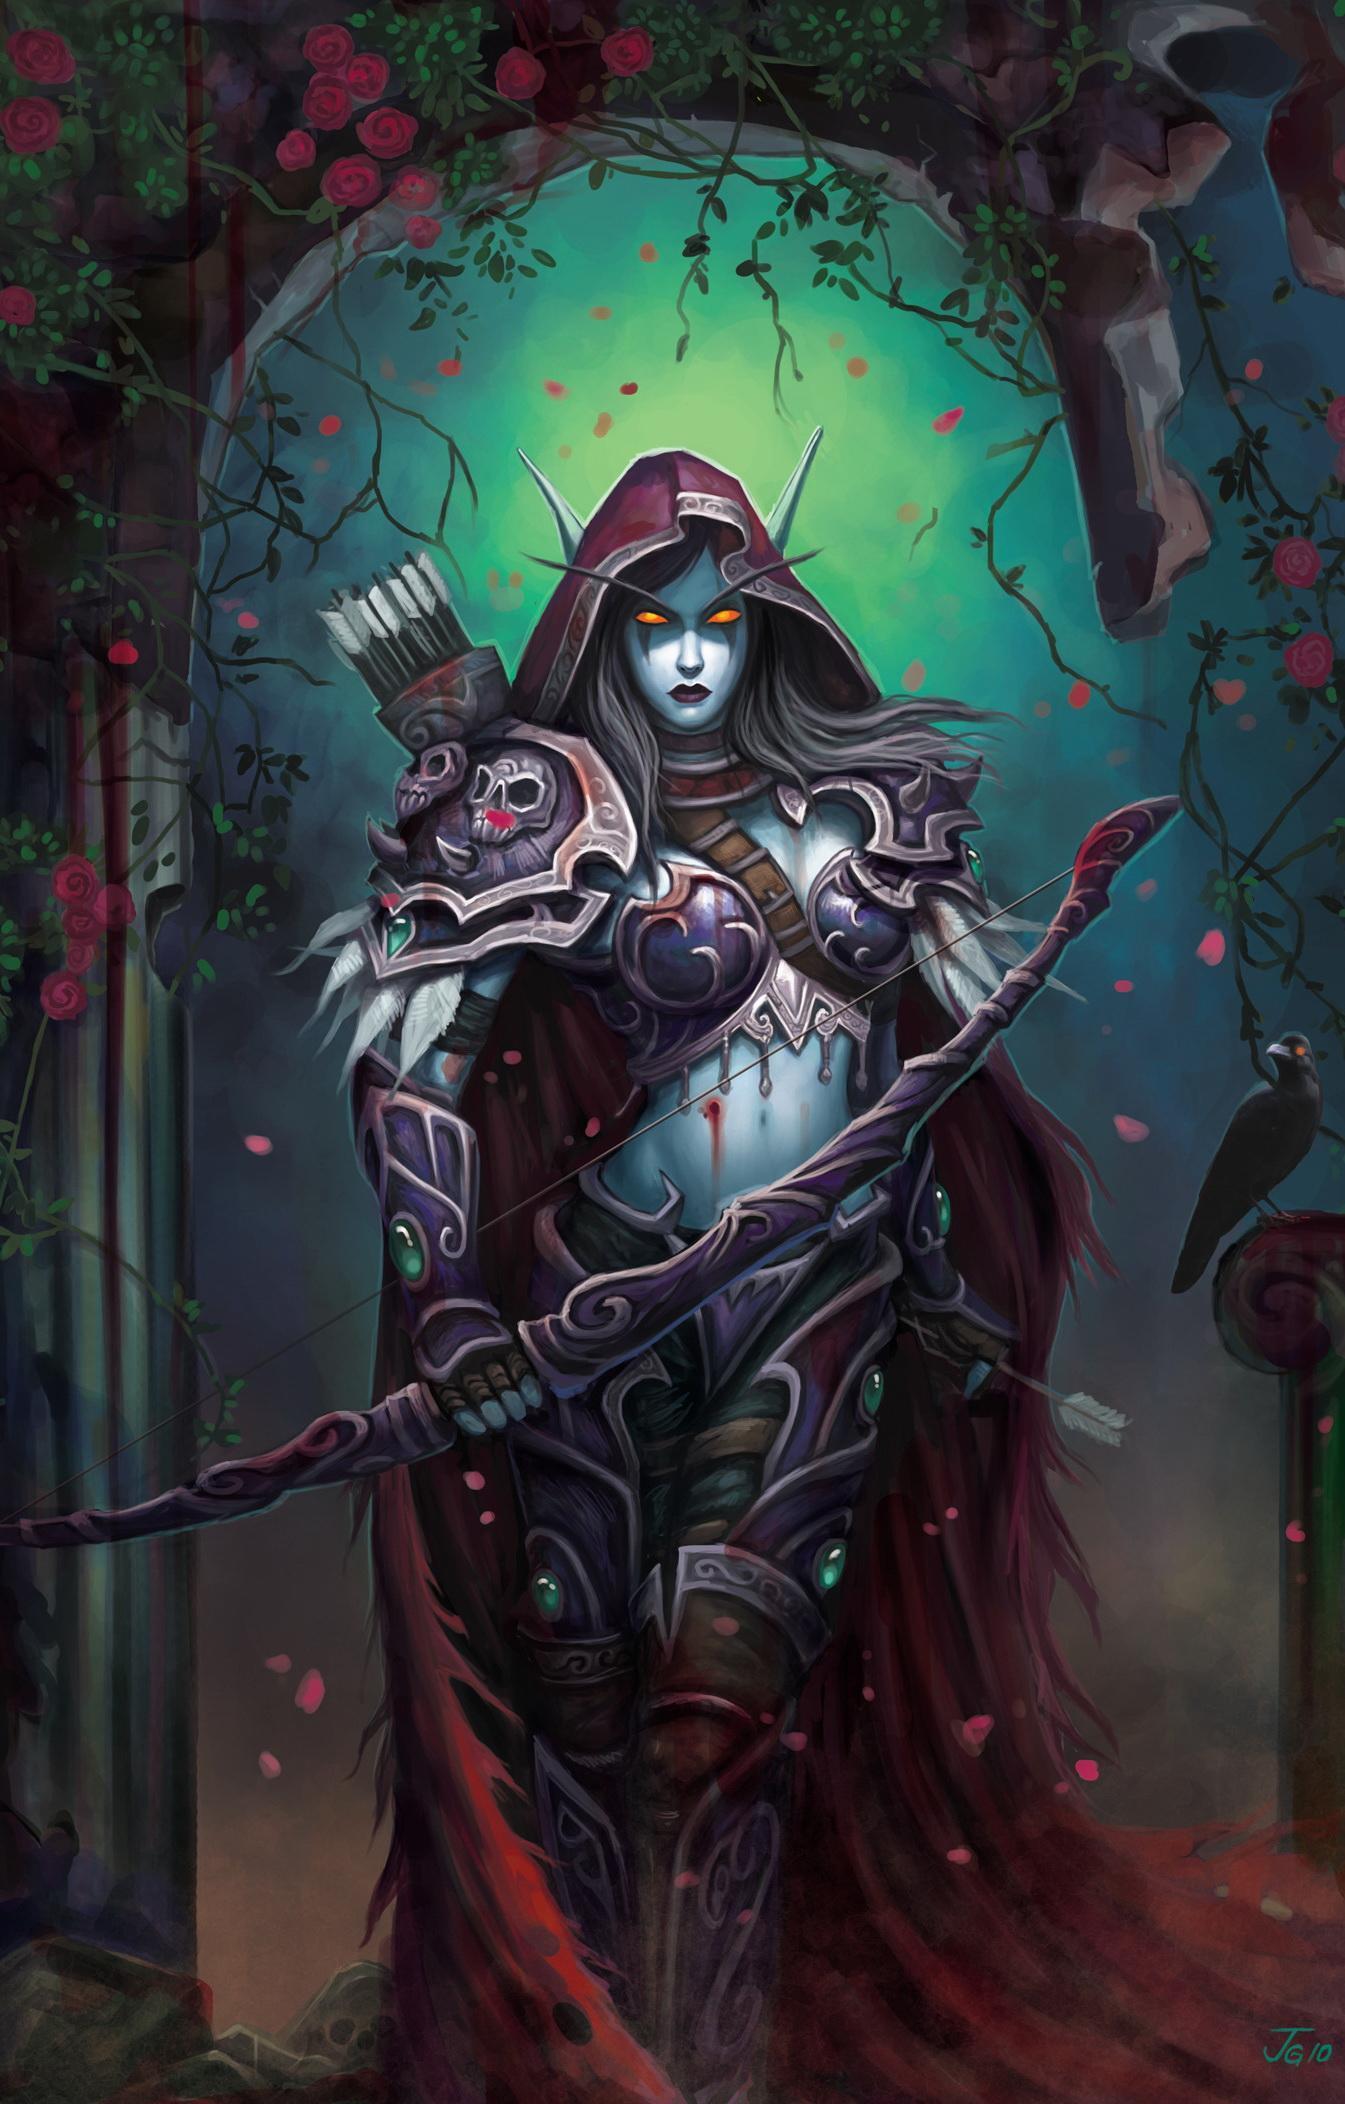 Sylvanas Windrunner guide to the World of Warcraft